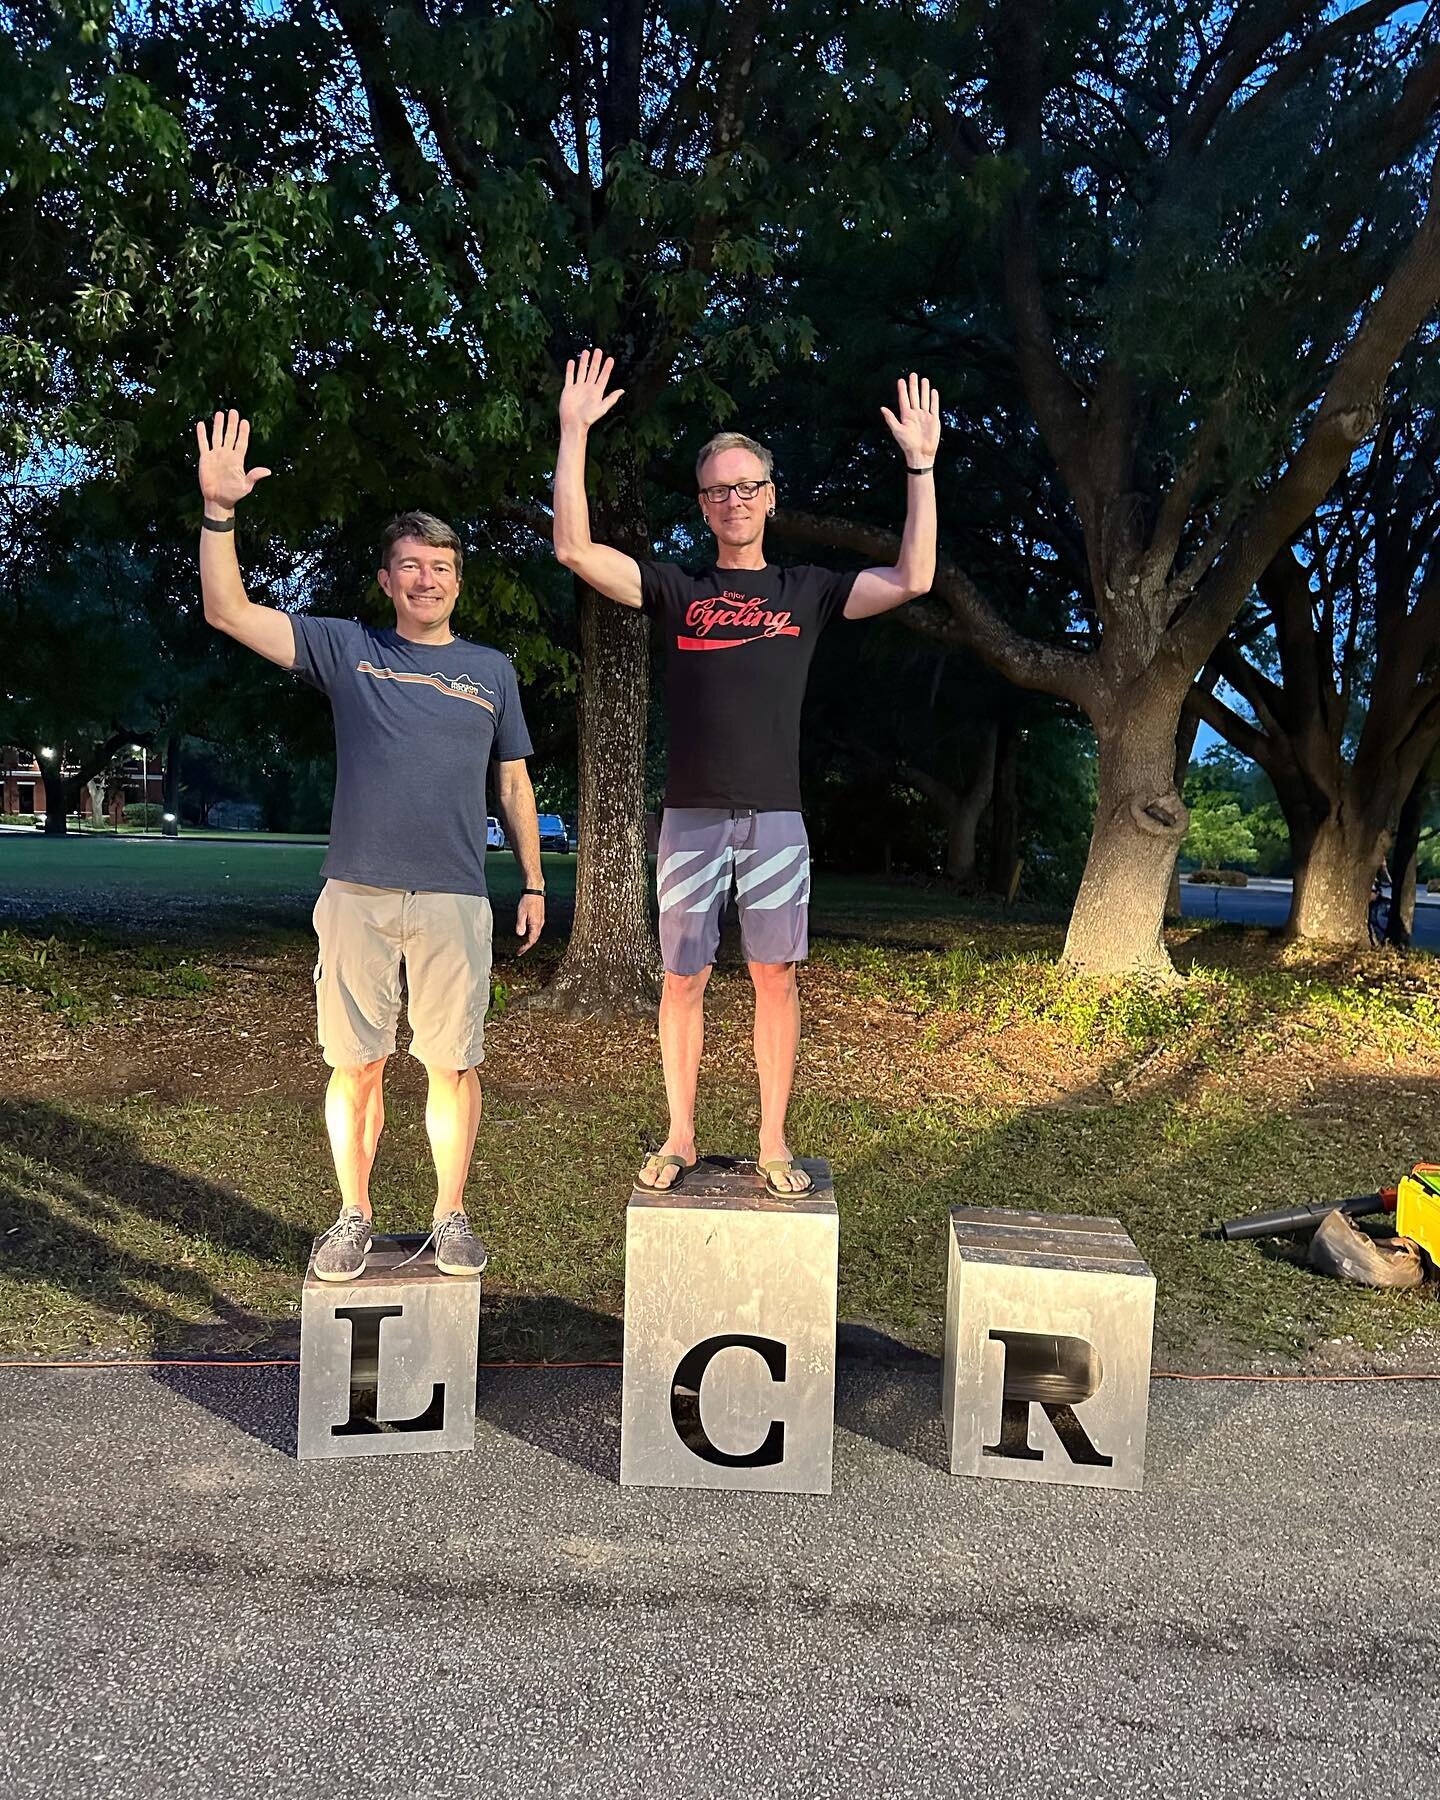 a great night to a great beginning for our summer crit series! thanks to all who came out, cheered, volunteered and everything else in-between! we&rsquo;ll see you next time! tonight&rsquo;s team results: CAT 5: @jasonalayne 🥇 CAT 4/5: @swbrown11 @o